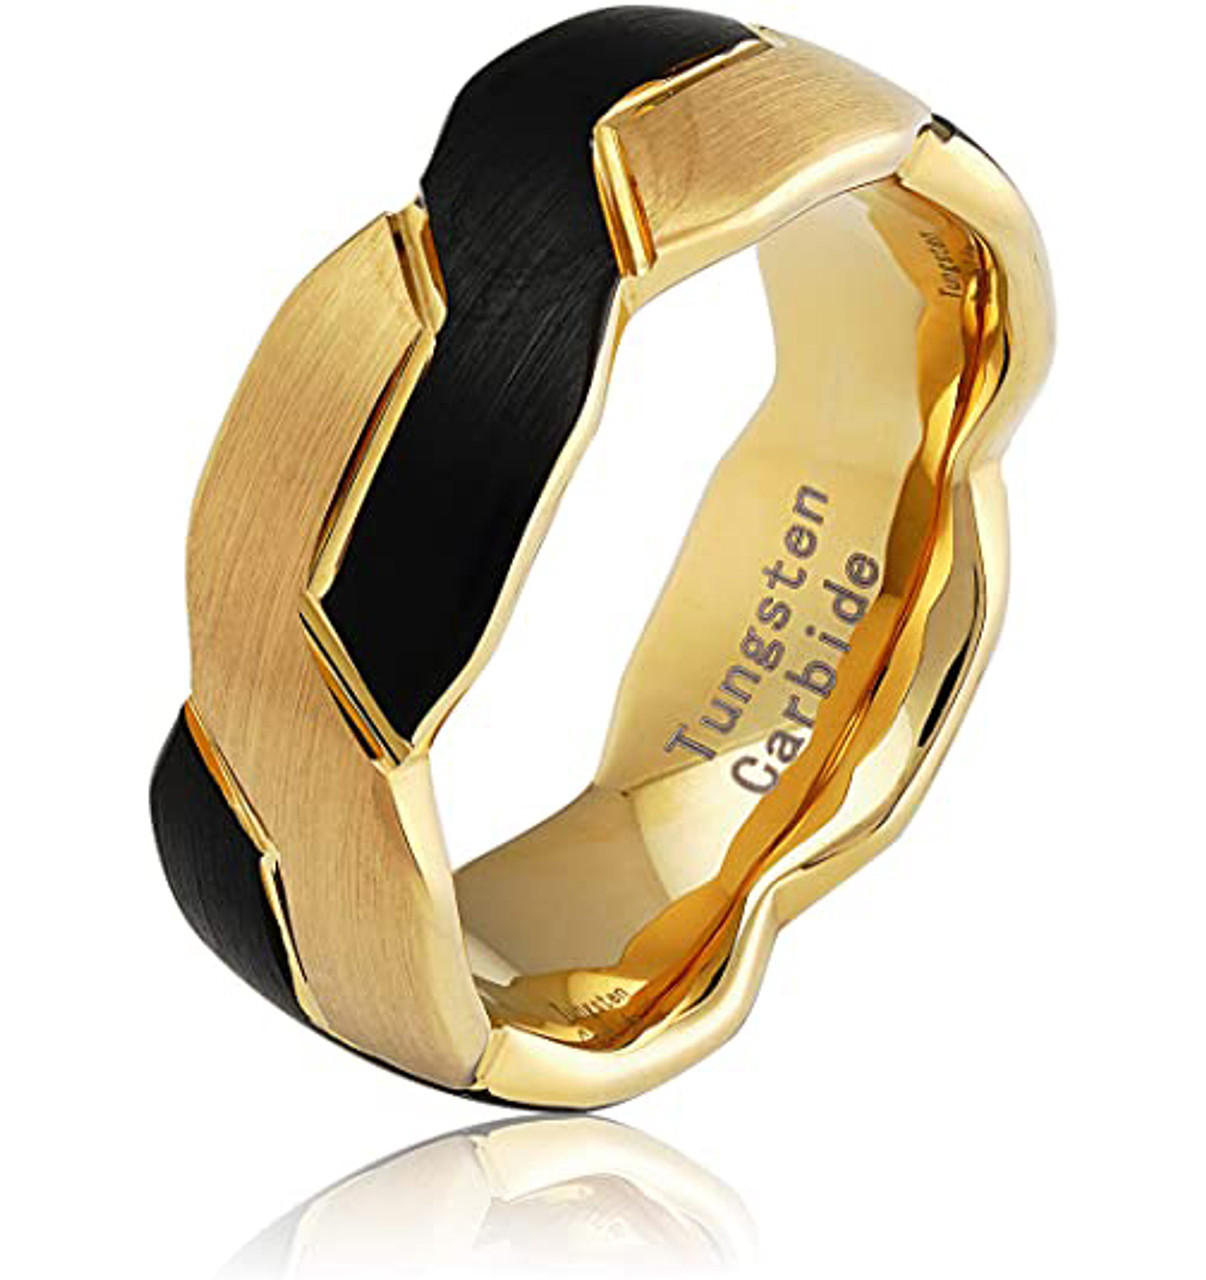 Unisex or Mens Matte Black and Gold Polished Tungsten Carbide Ring - Infinity Knot Pattern Wedding ring band. Comfort Fit and High Polished